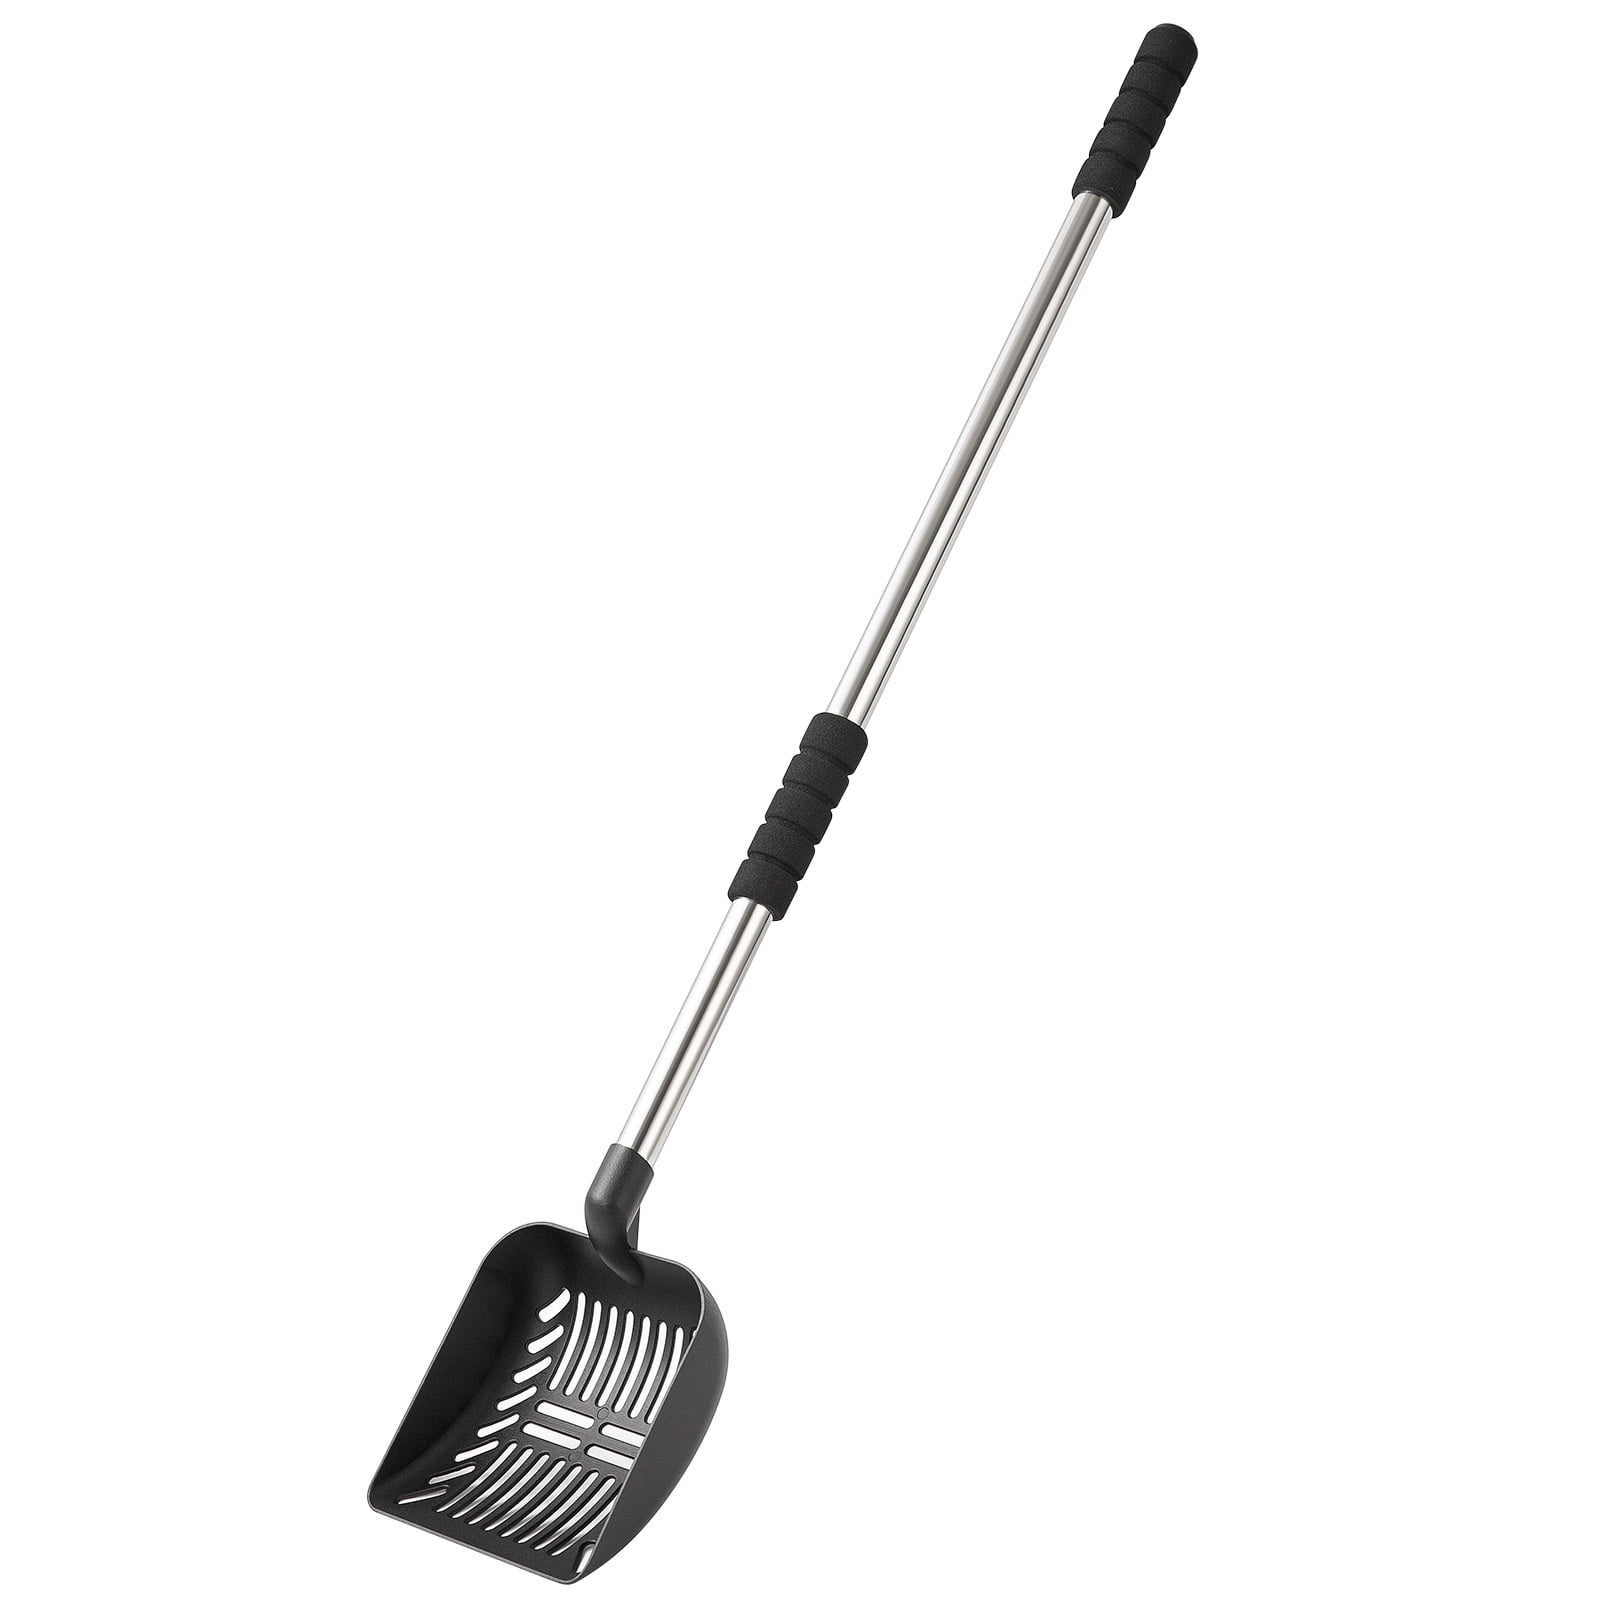 Black Niikee Cat Litter Scoop,Cats Litter Shovel Metal Wire with Black Resin Coating for Efficiently Cleaning